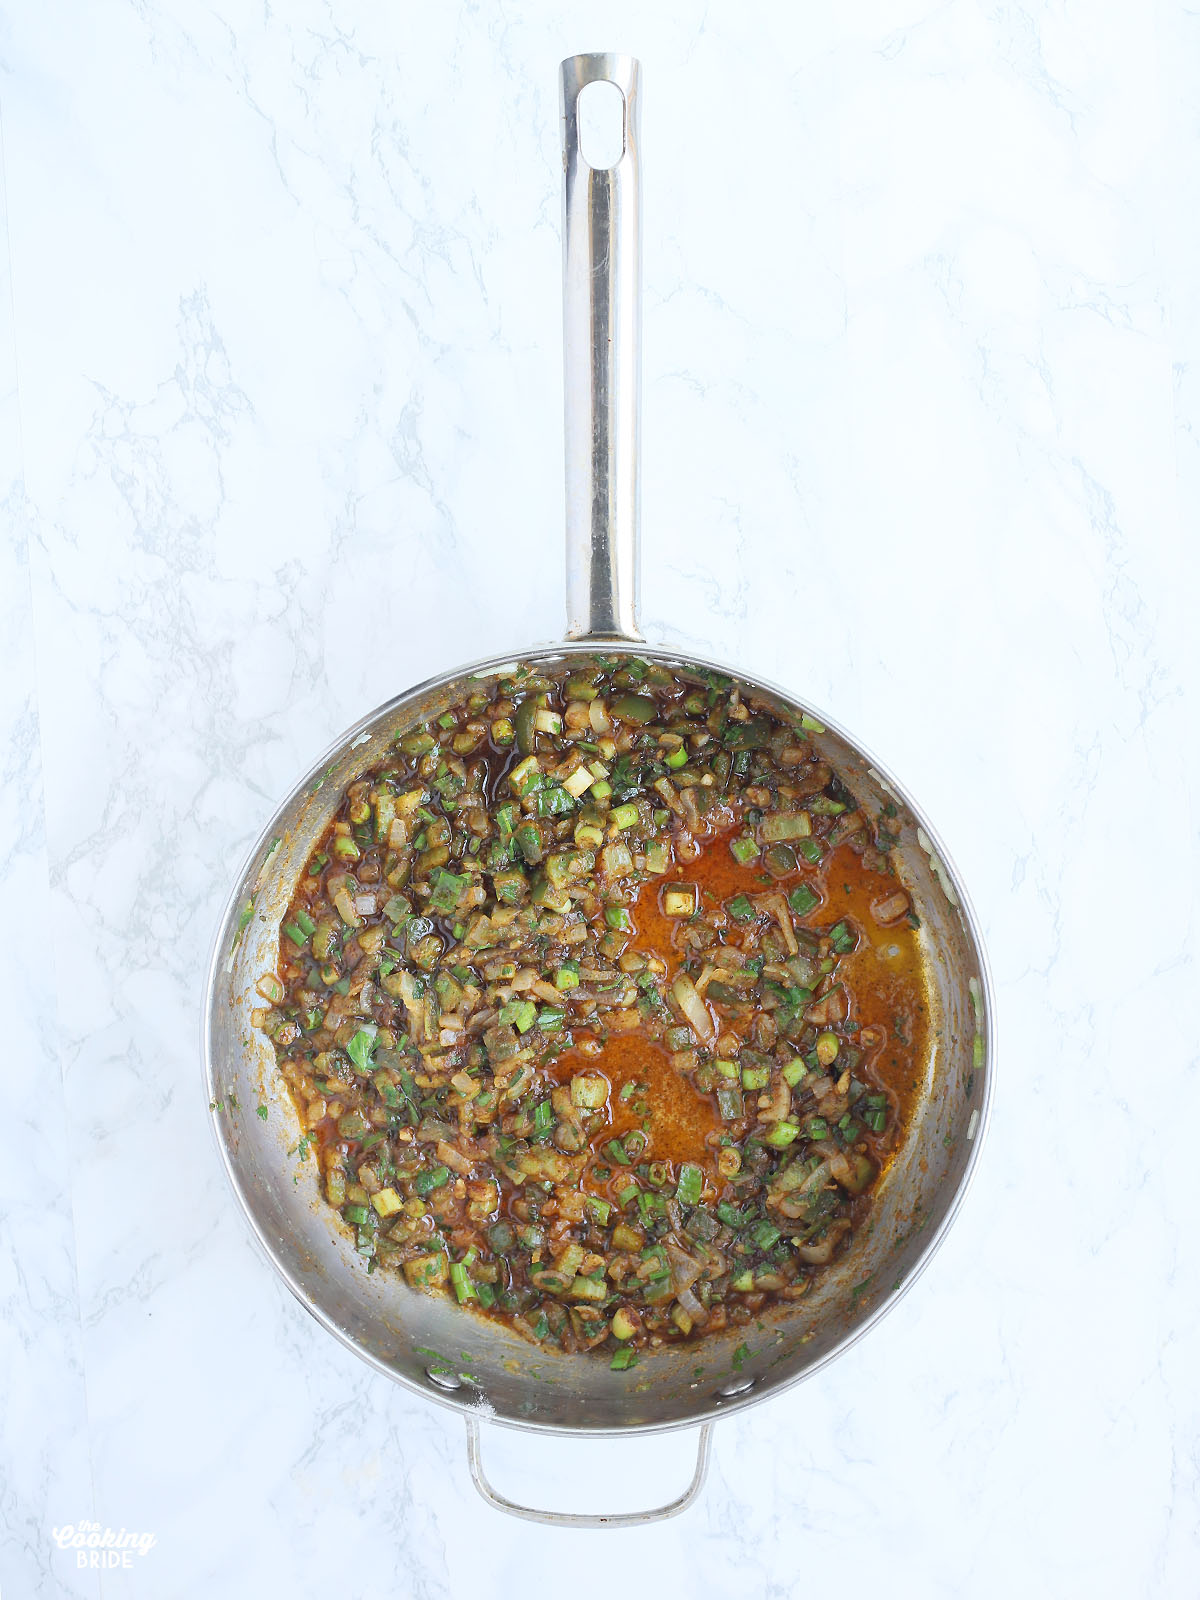 sauteed vegetables, herbs and spices in a stainless steel saucepan